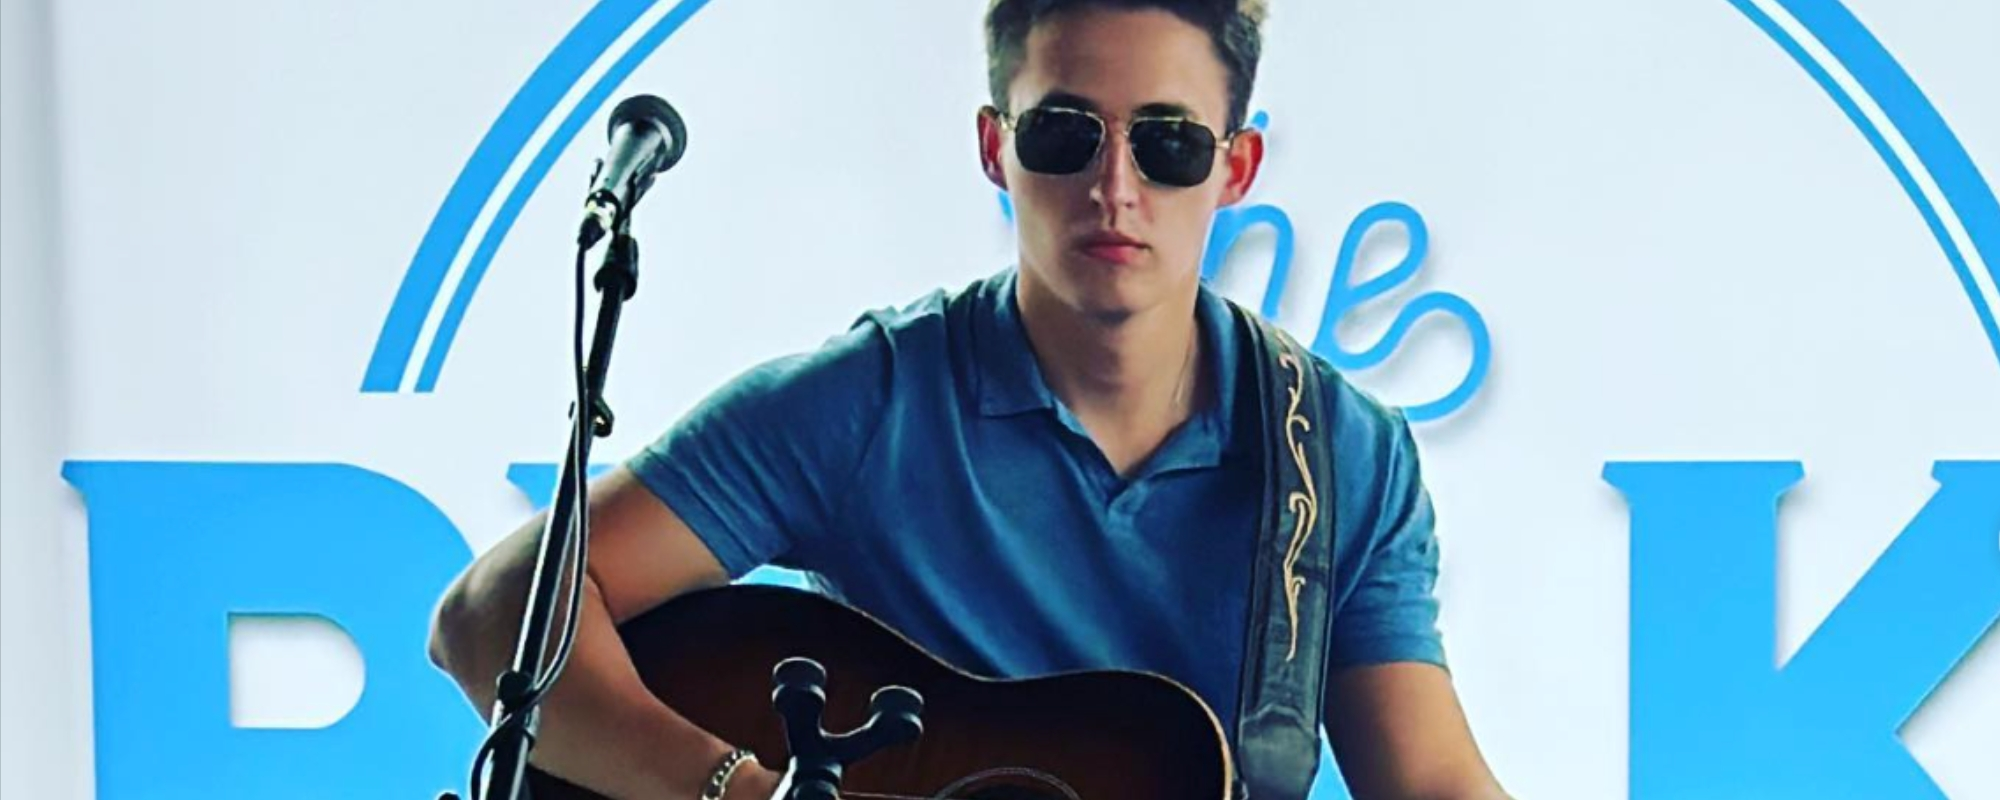 Meet Timothy Wayne, Tim McGraw’s Nephew Who May Just Be the Next Big Country Star